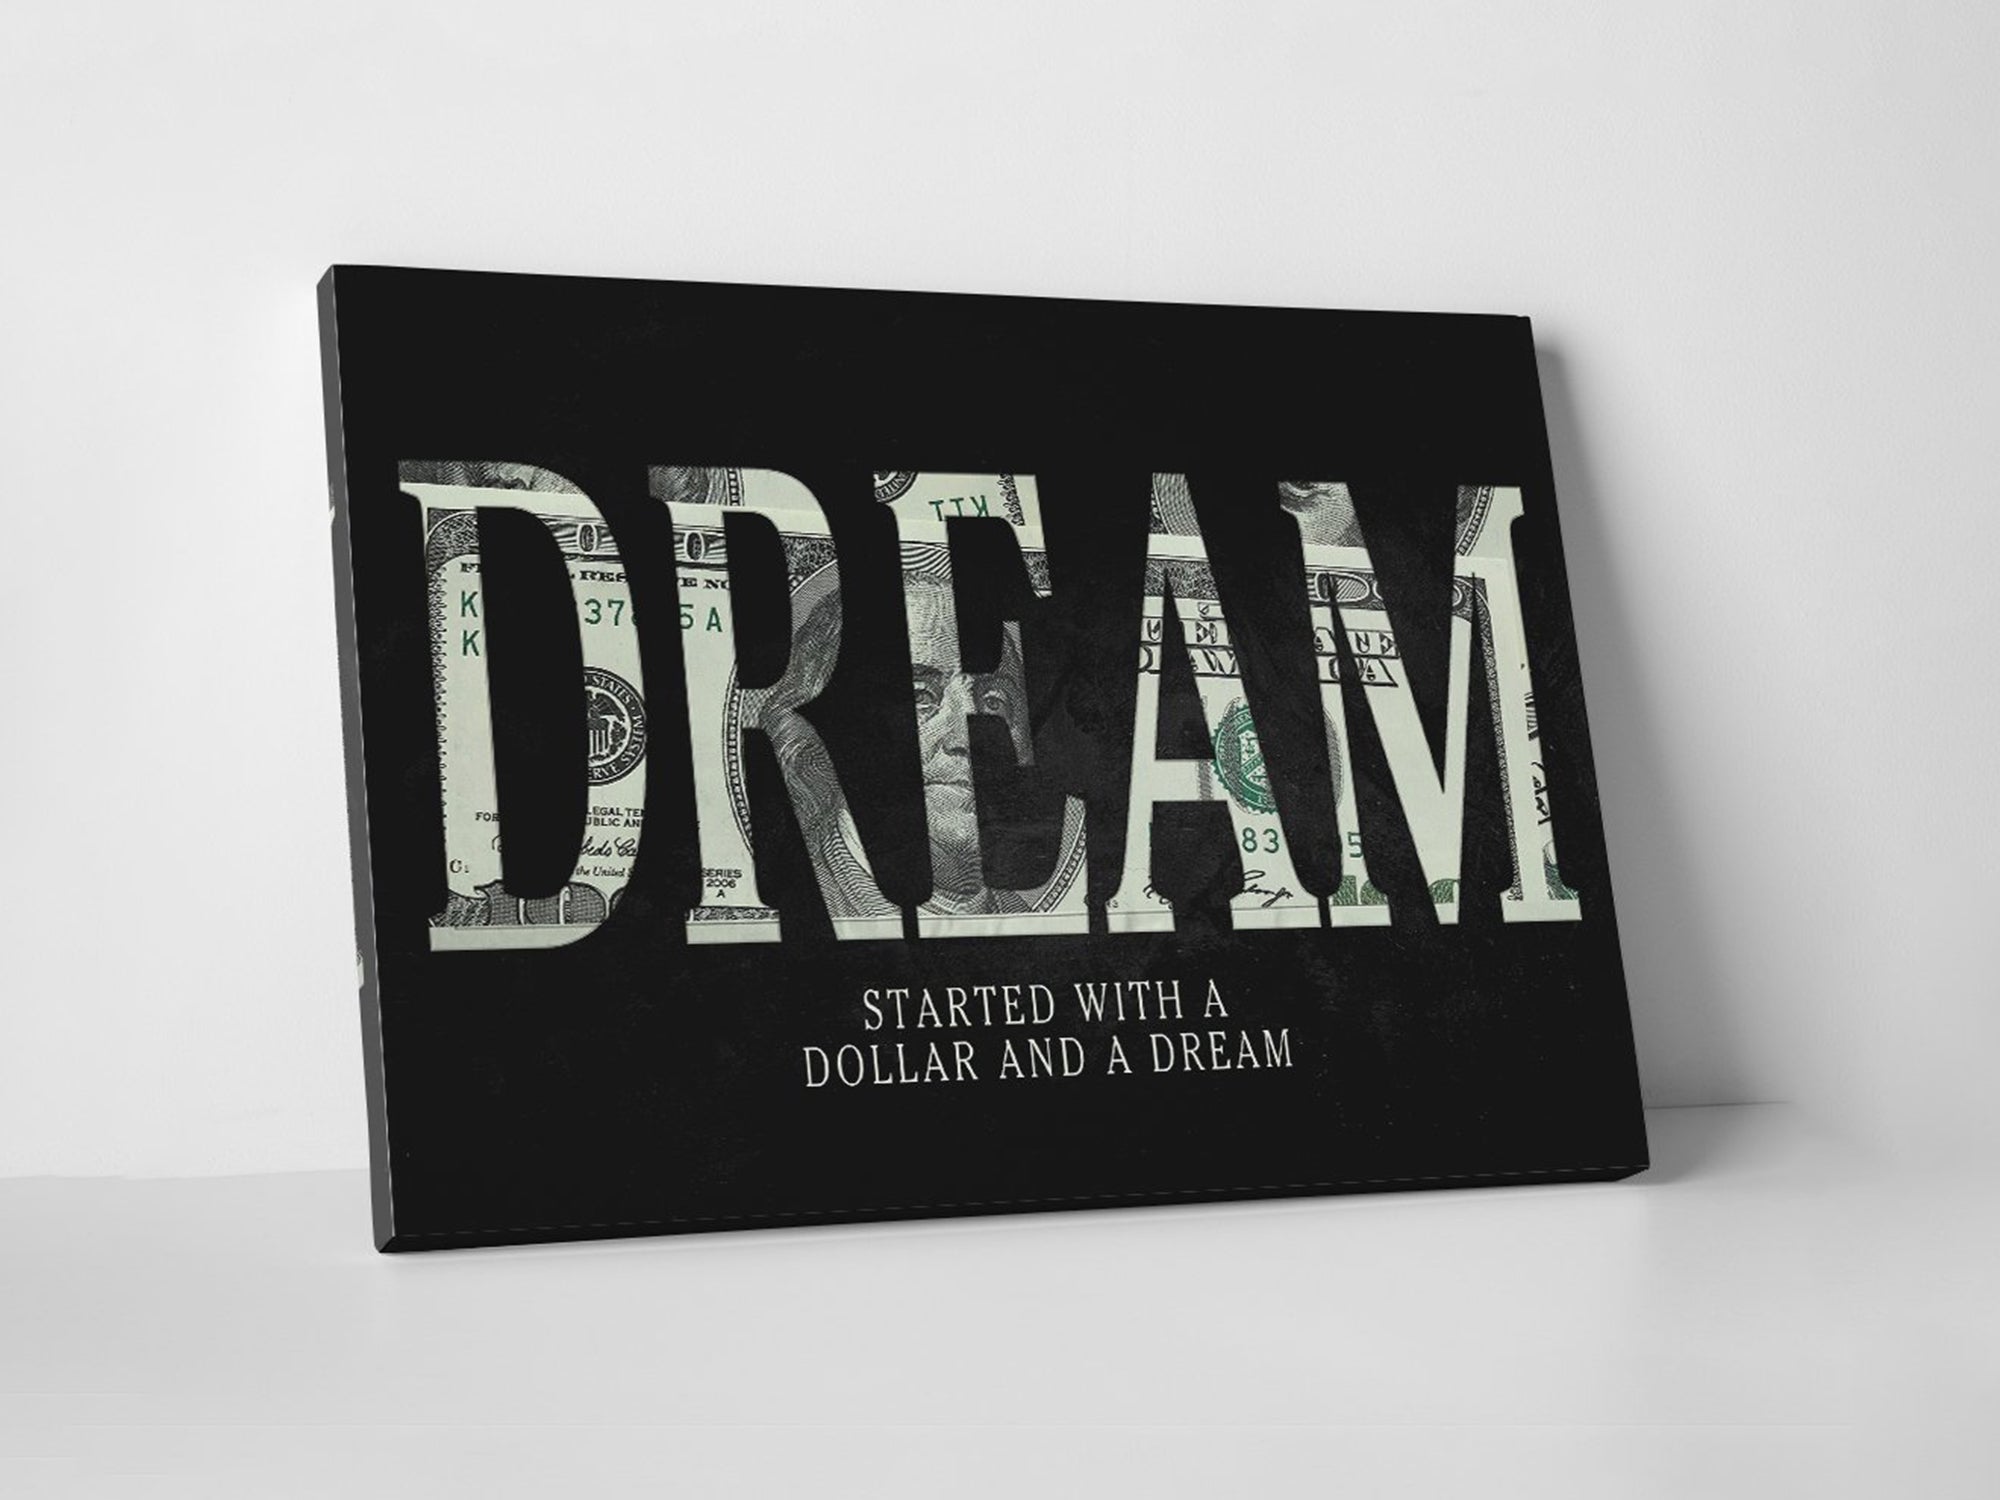 DREAM with a Dollar - Motivational - Living Room Canvas Wall Art